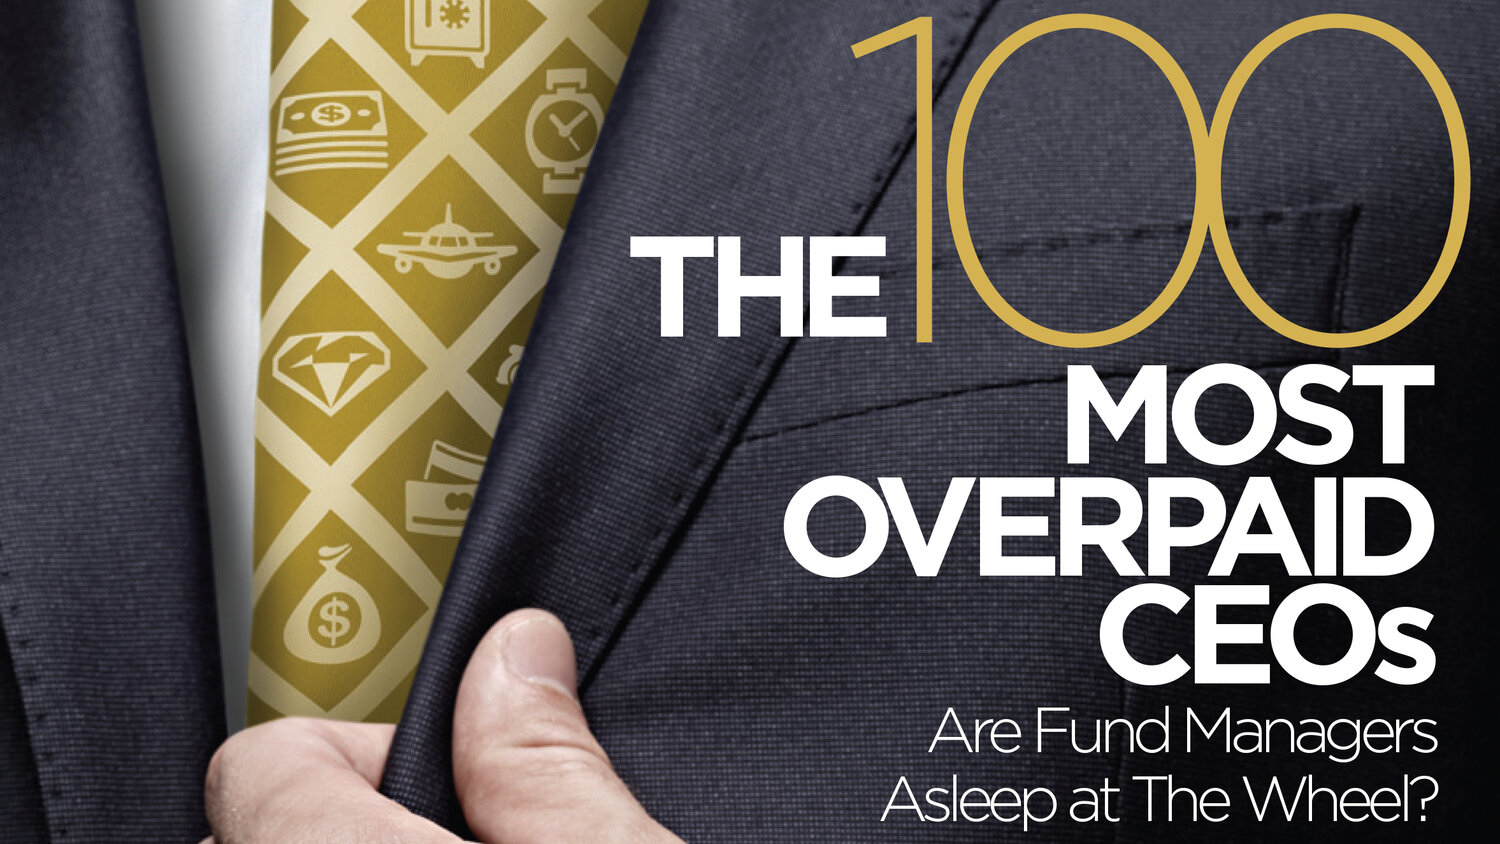 The 100 Most Overpaid CEOs 2020 — As You Sow